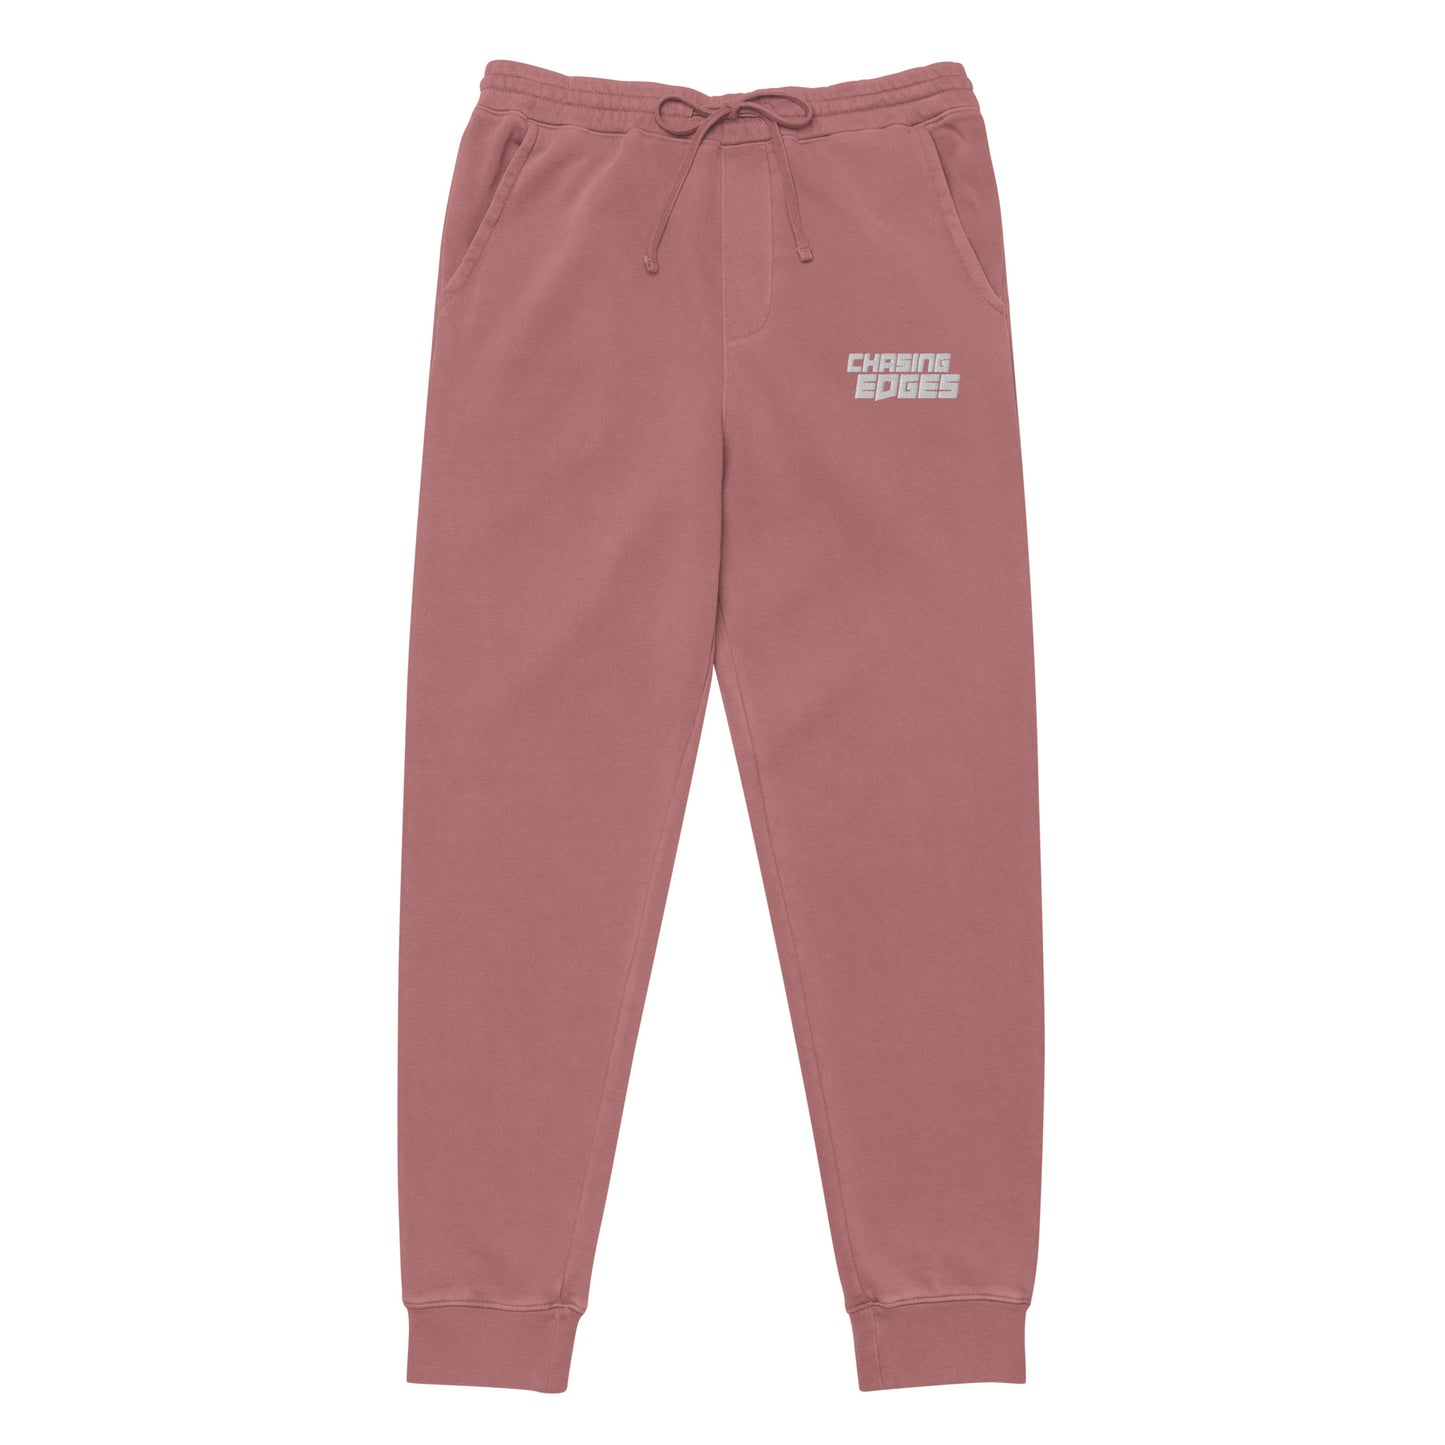 CHASING EDGES EMBROIDERED LOGO SWEATPANTS (MORE COLORS)